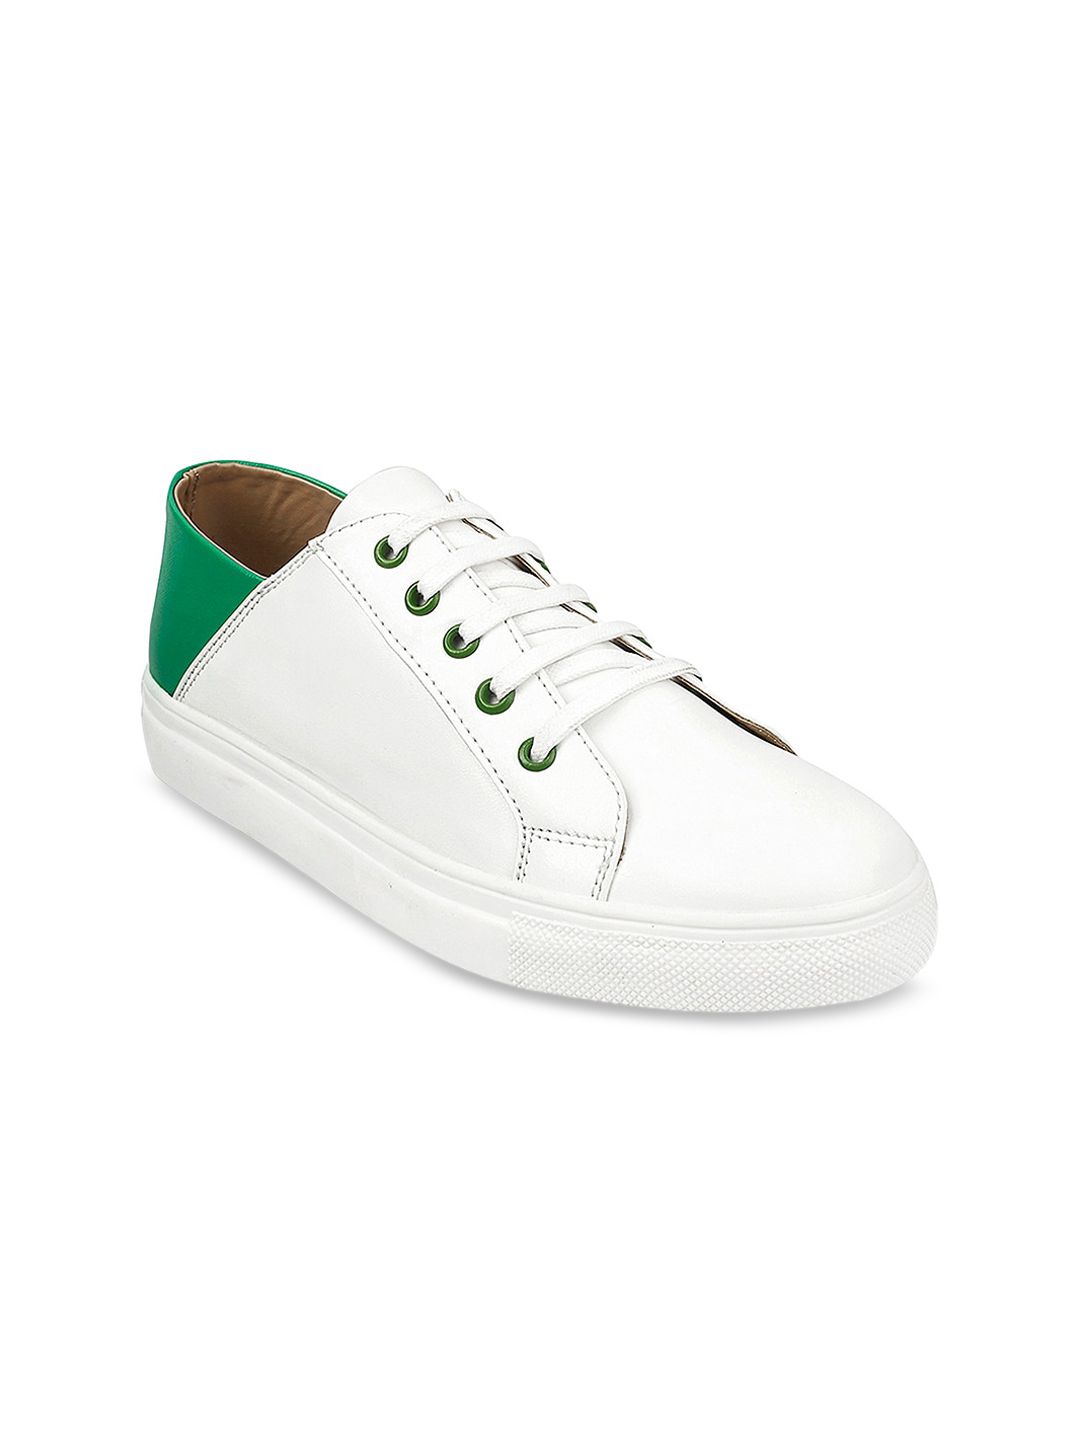 Wet Blue Women White & Green Colourblocked Sneakers Price in India